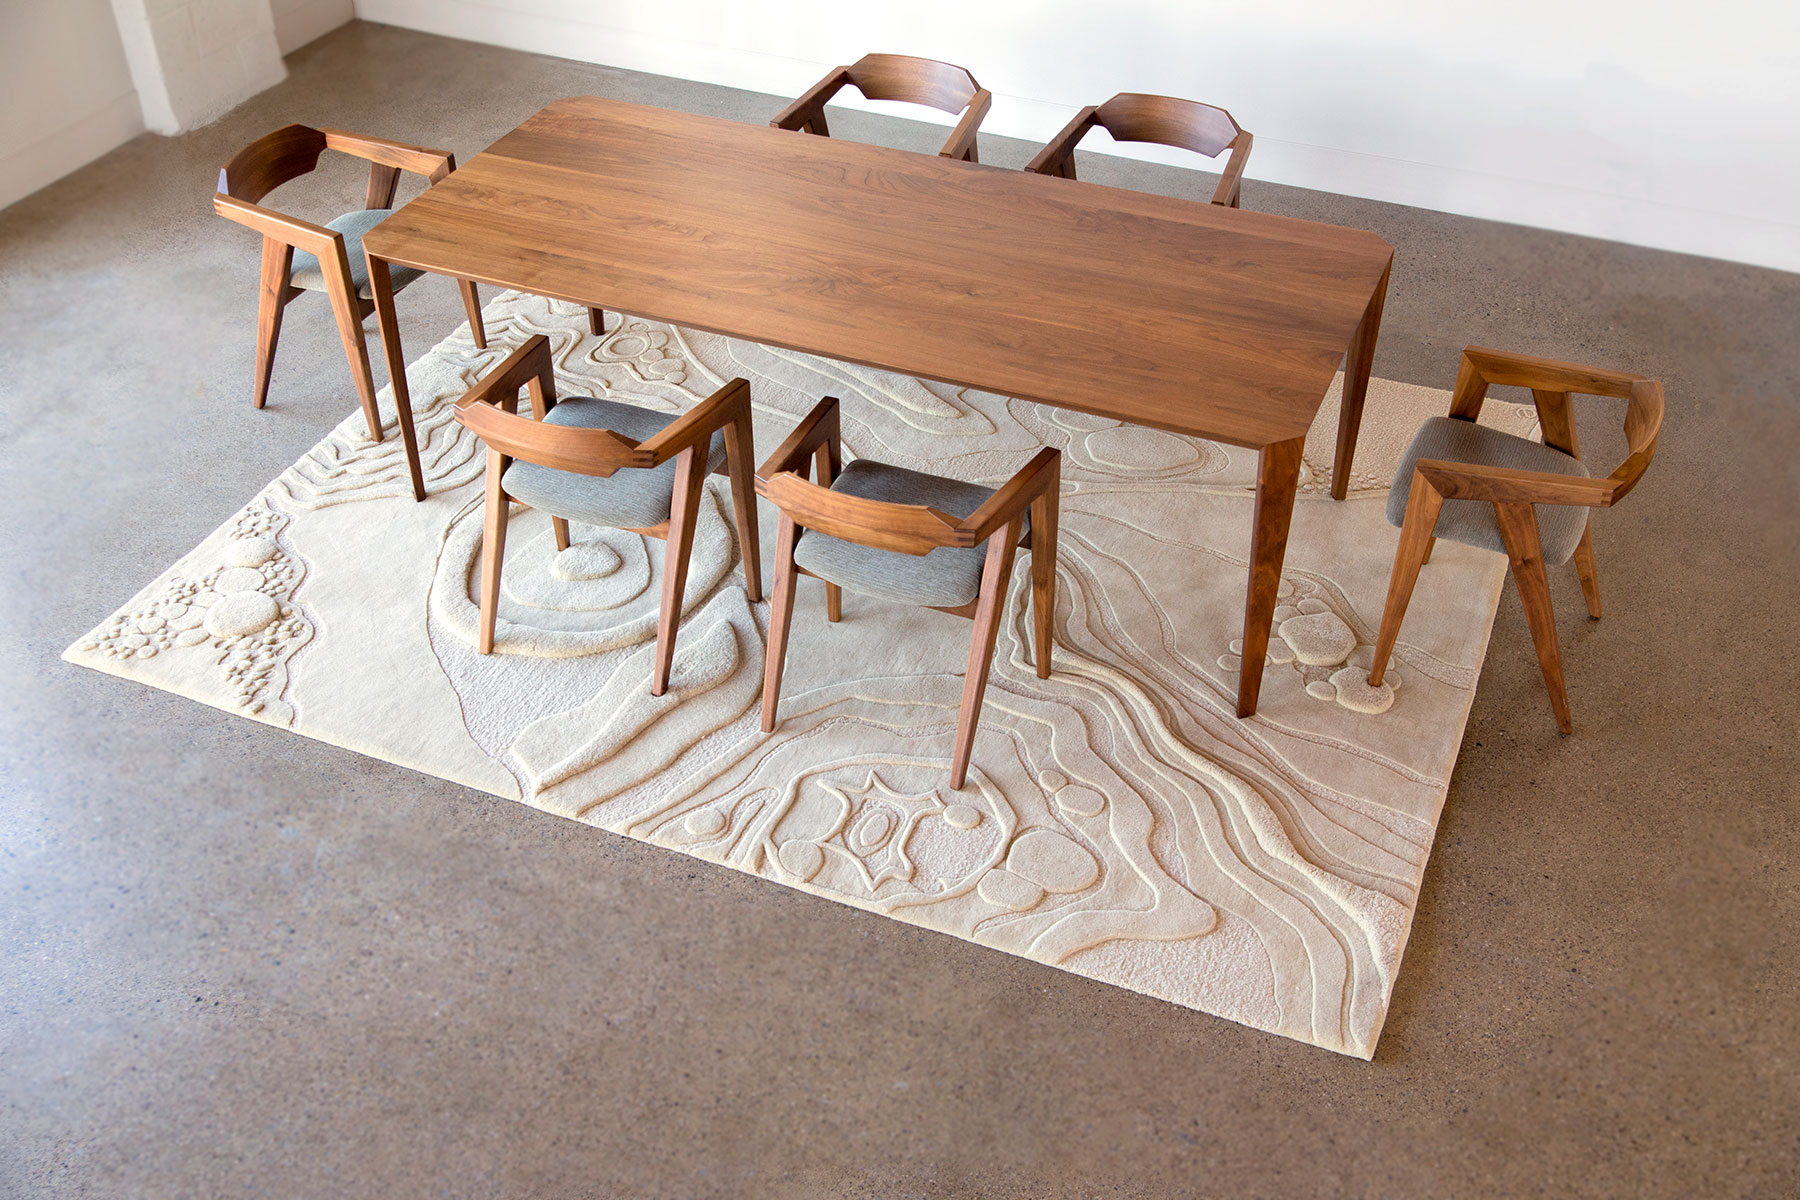 A dining room table sits on top of an organic patterned rug called Nebula